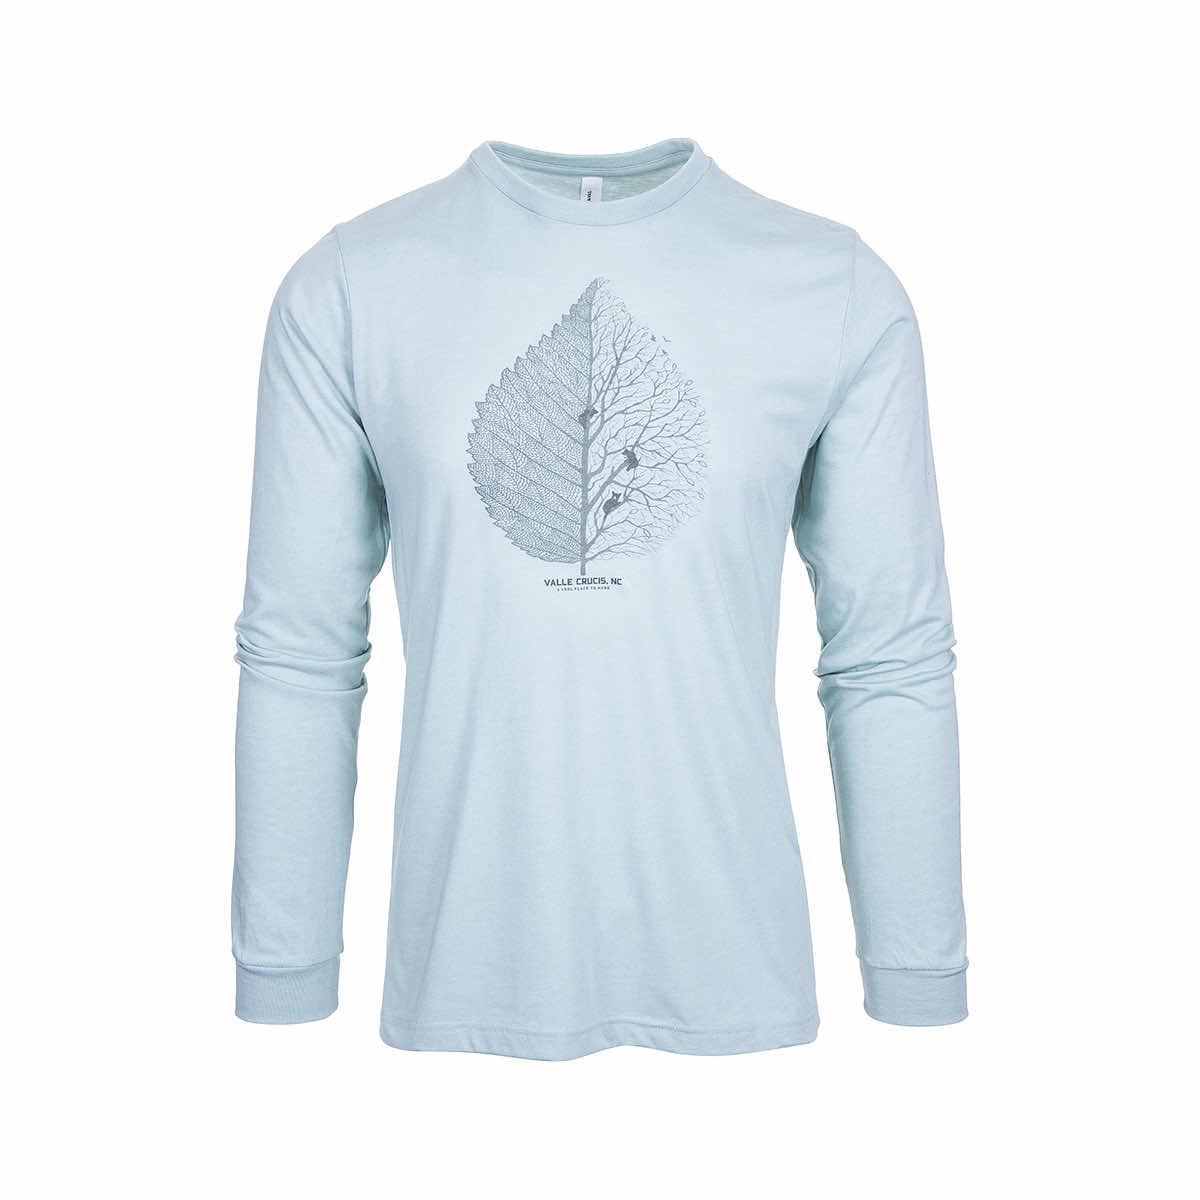  Valle Crucis Nc Cool Place To Hang Long Sleeve T- Shirt